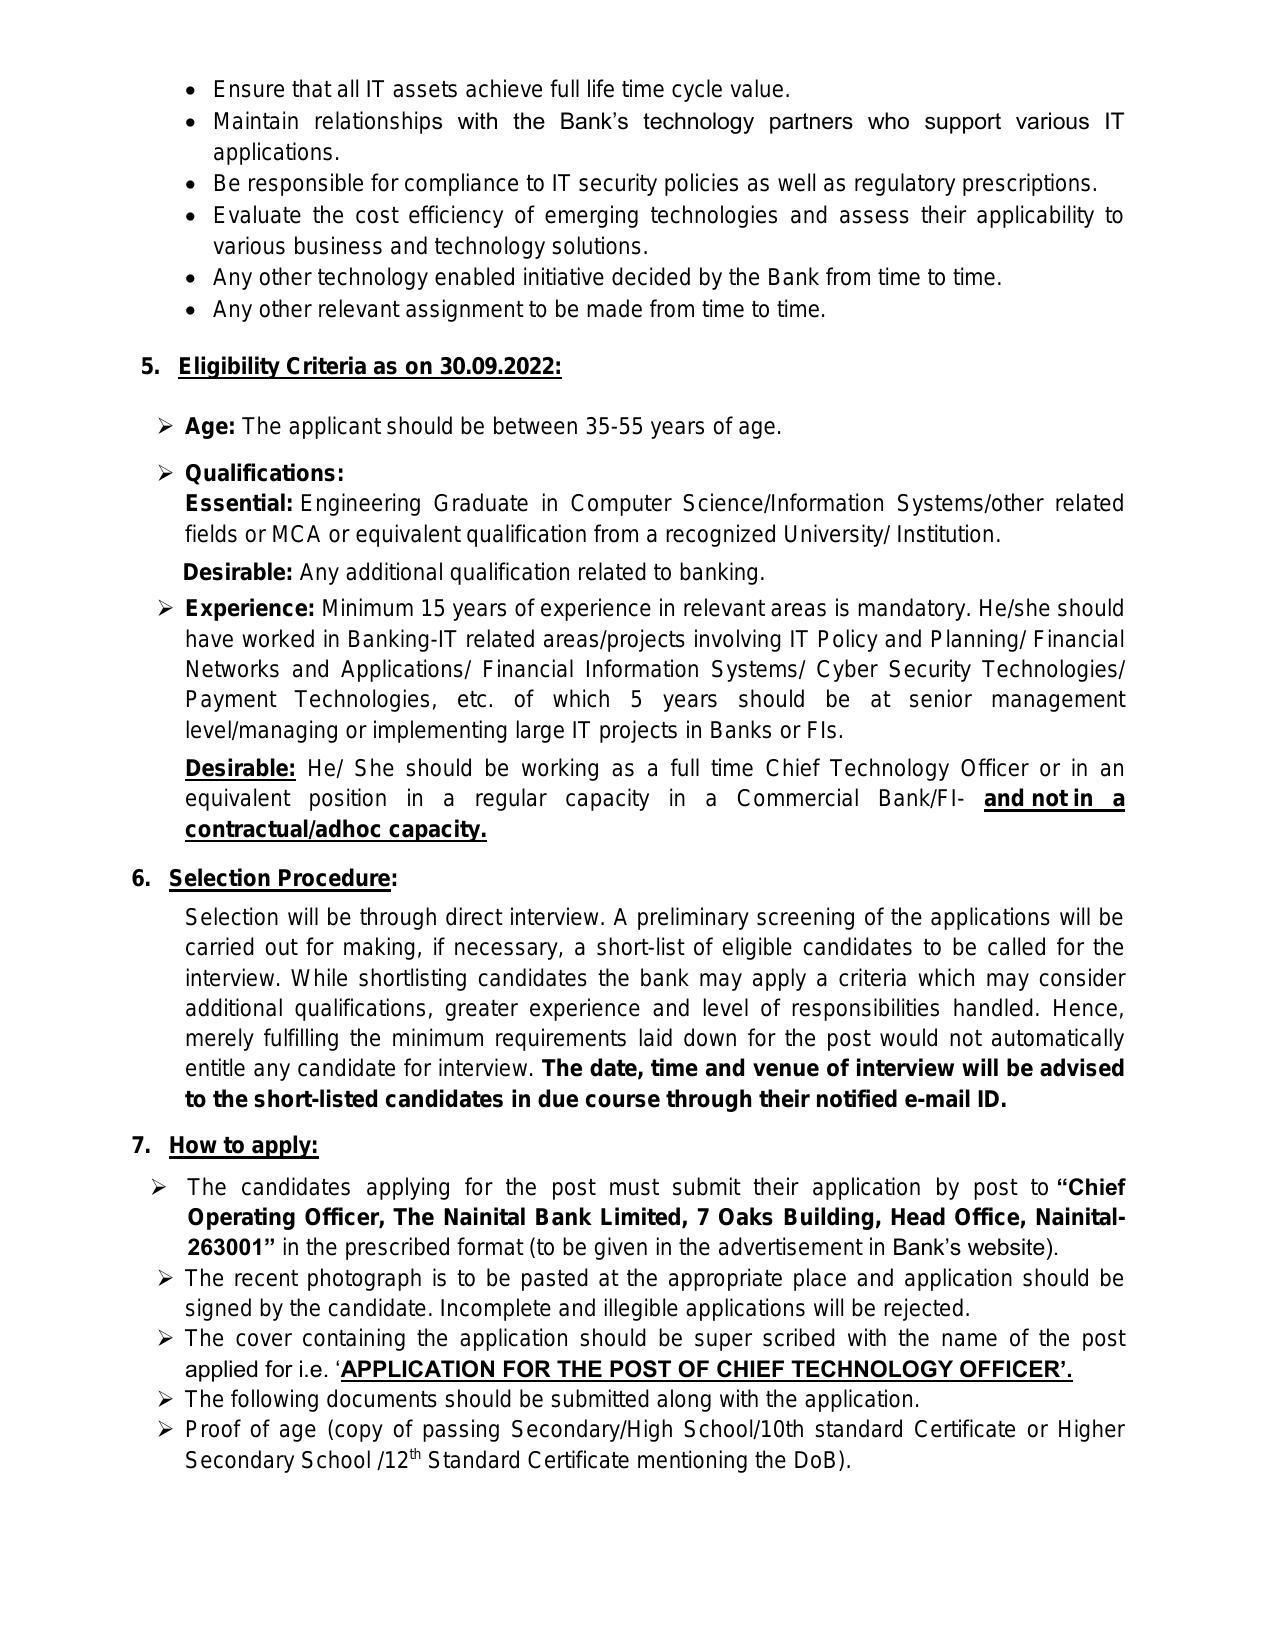 Nainital Bank Invites Application for Chief Technology Officer Recruitment 2022 - Page 1